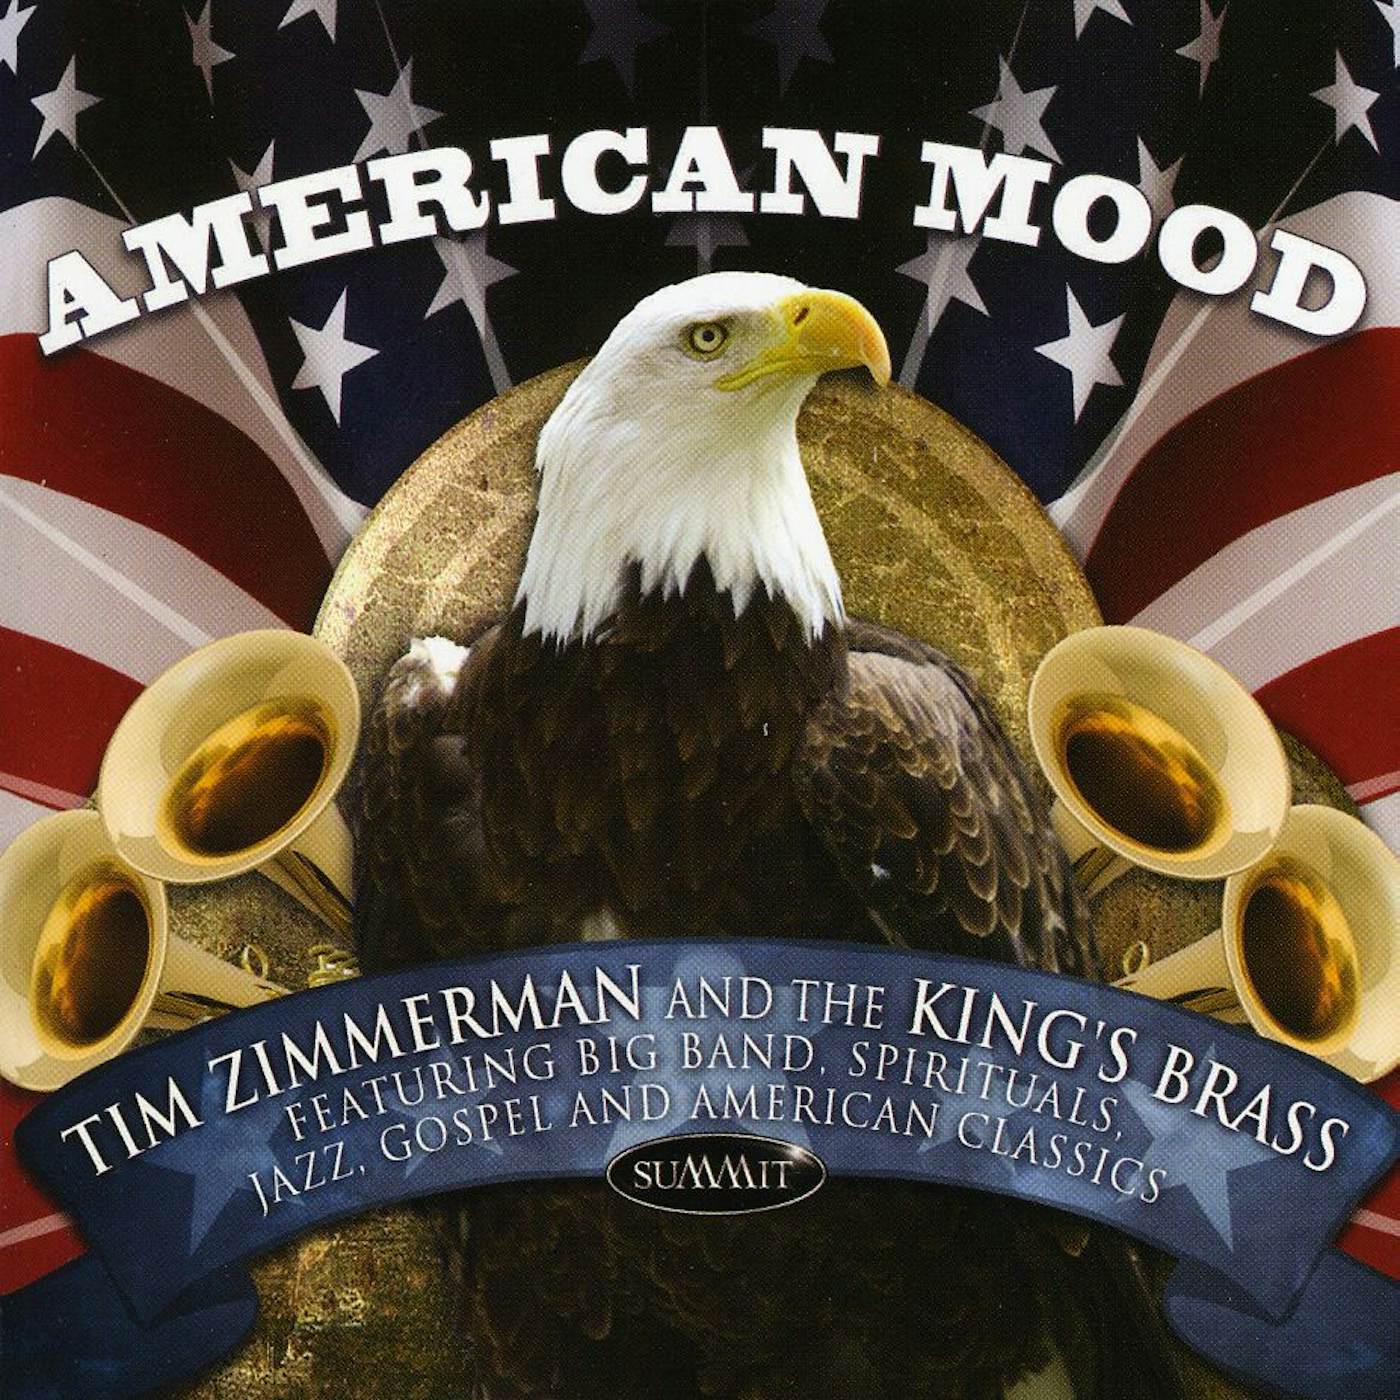 The King's Brass AMERICAN MOOD CD